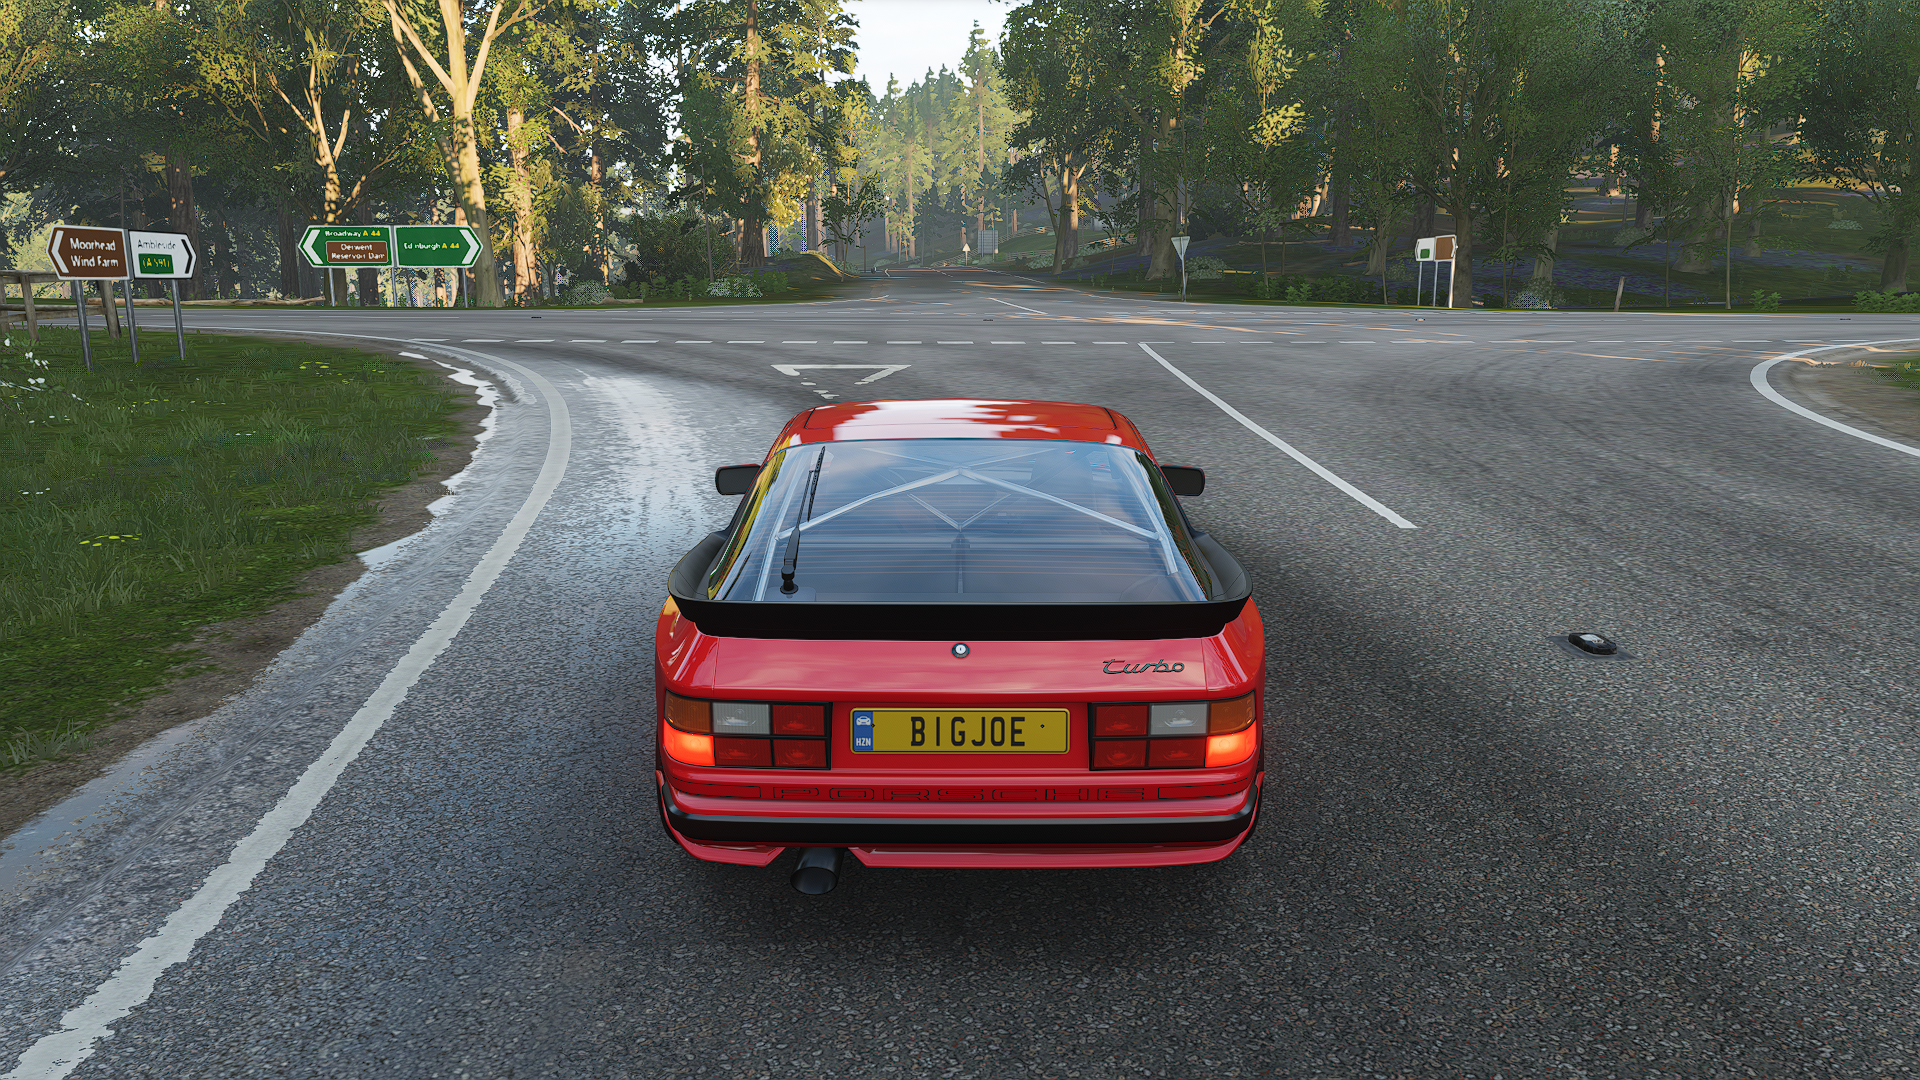 General 1920x1080 Forza Forza Horizon Forza Horizon 4 car racing video games rear view licence plates road CGI taillights trees sign Porsche German cars Volkswagen Group PlaygroundGames